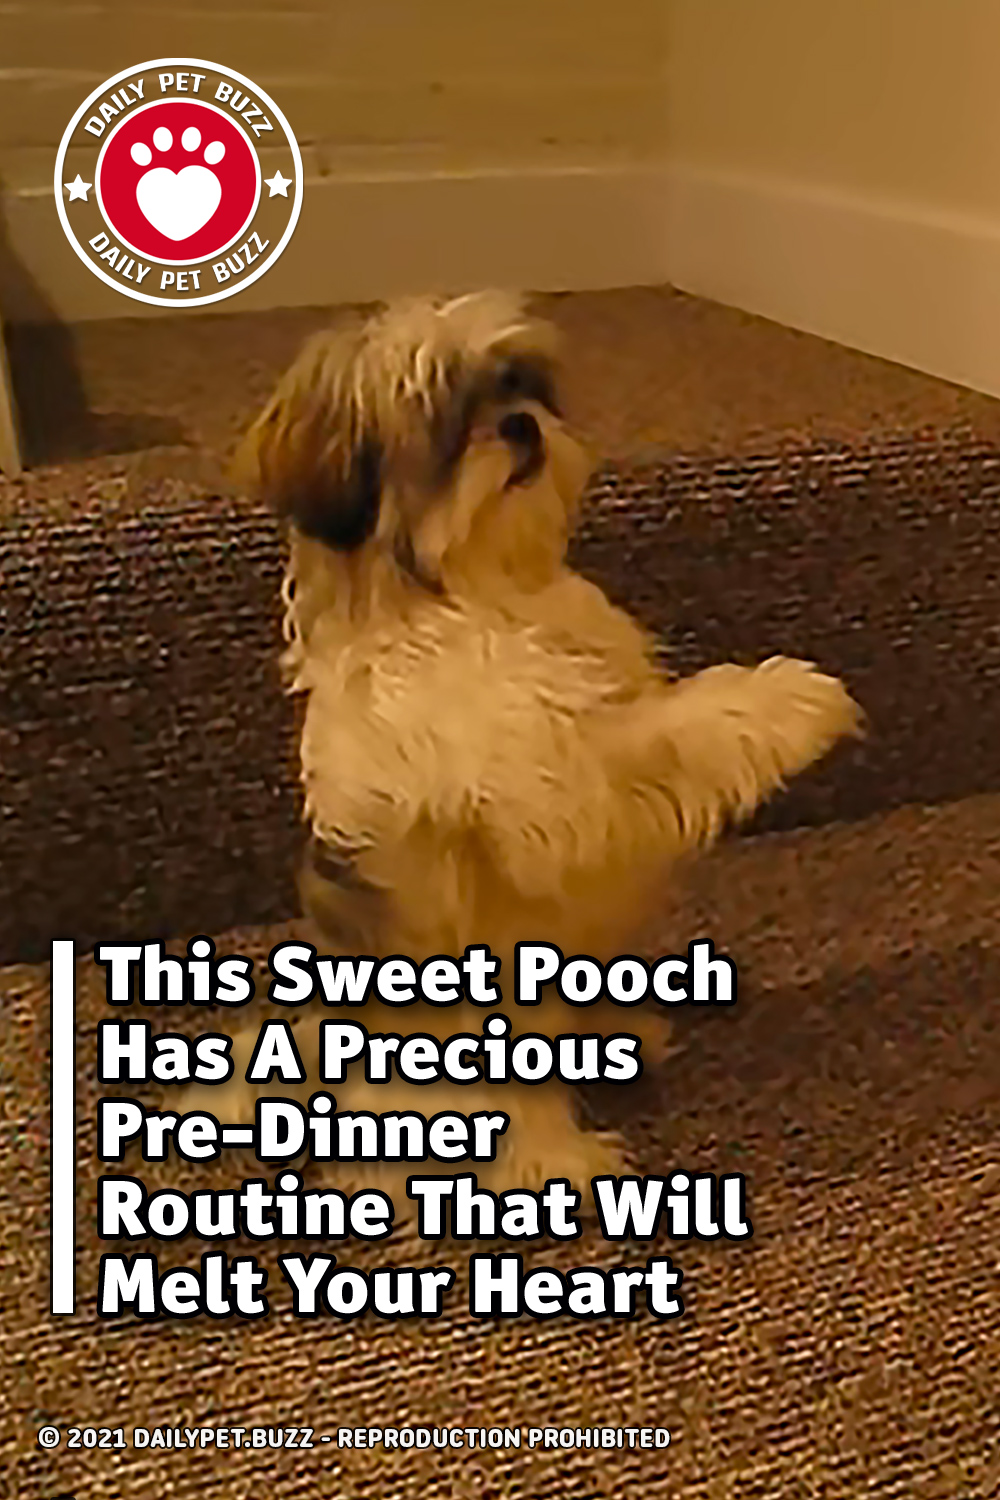 This Sweet Pooch Has A Precious Pre-Dinner Routine That Will Melt Your Heart